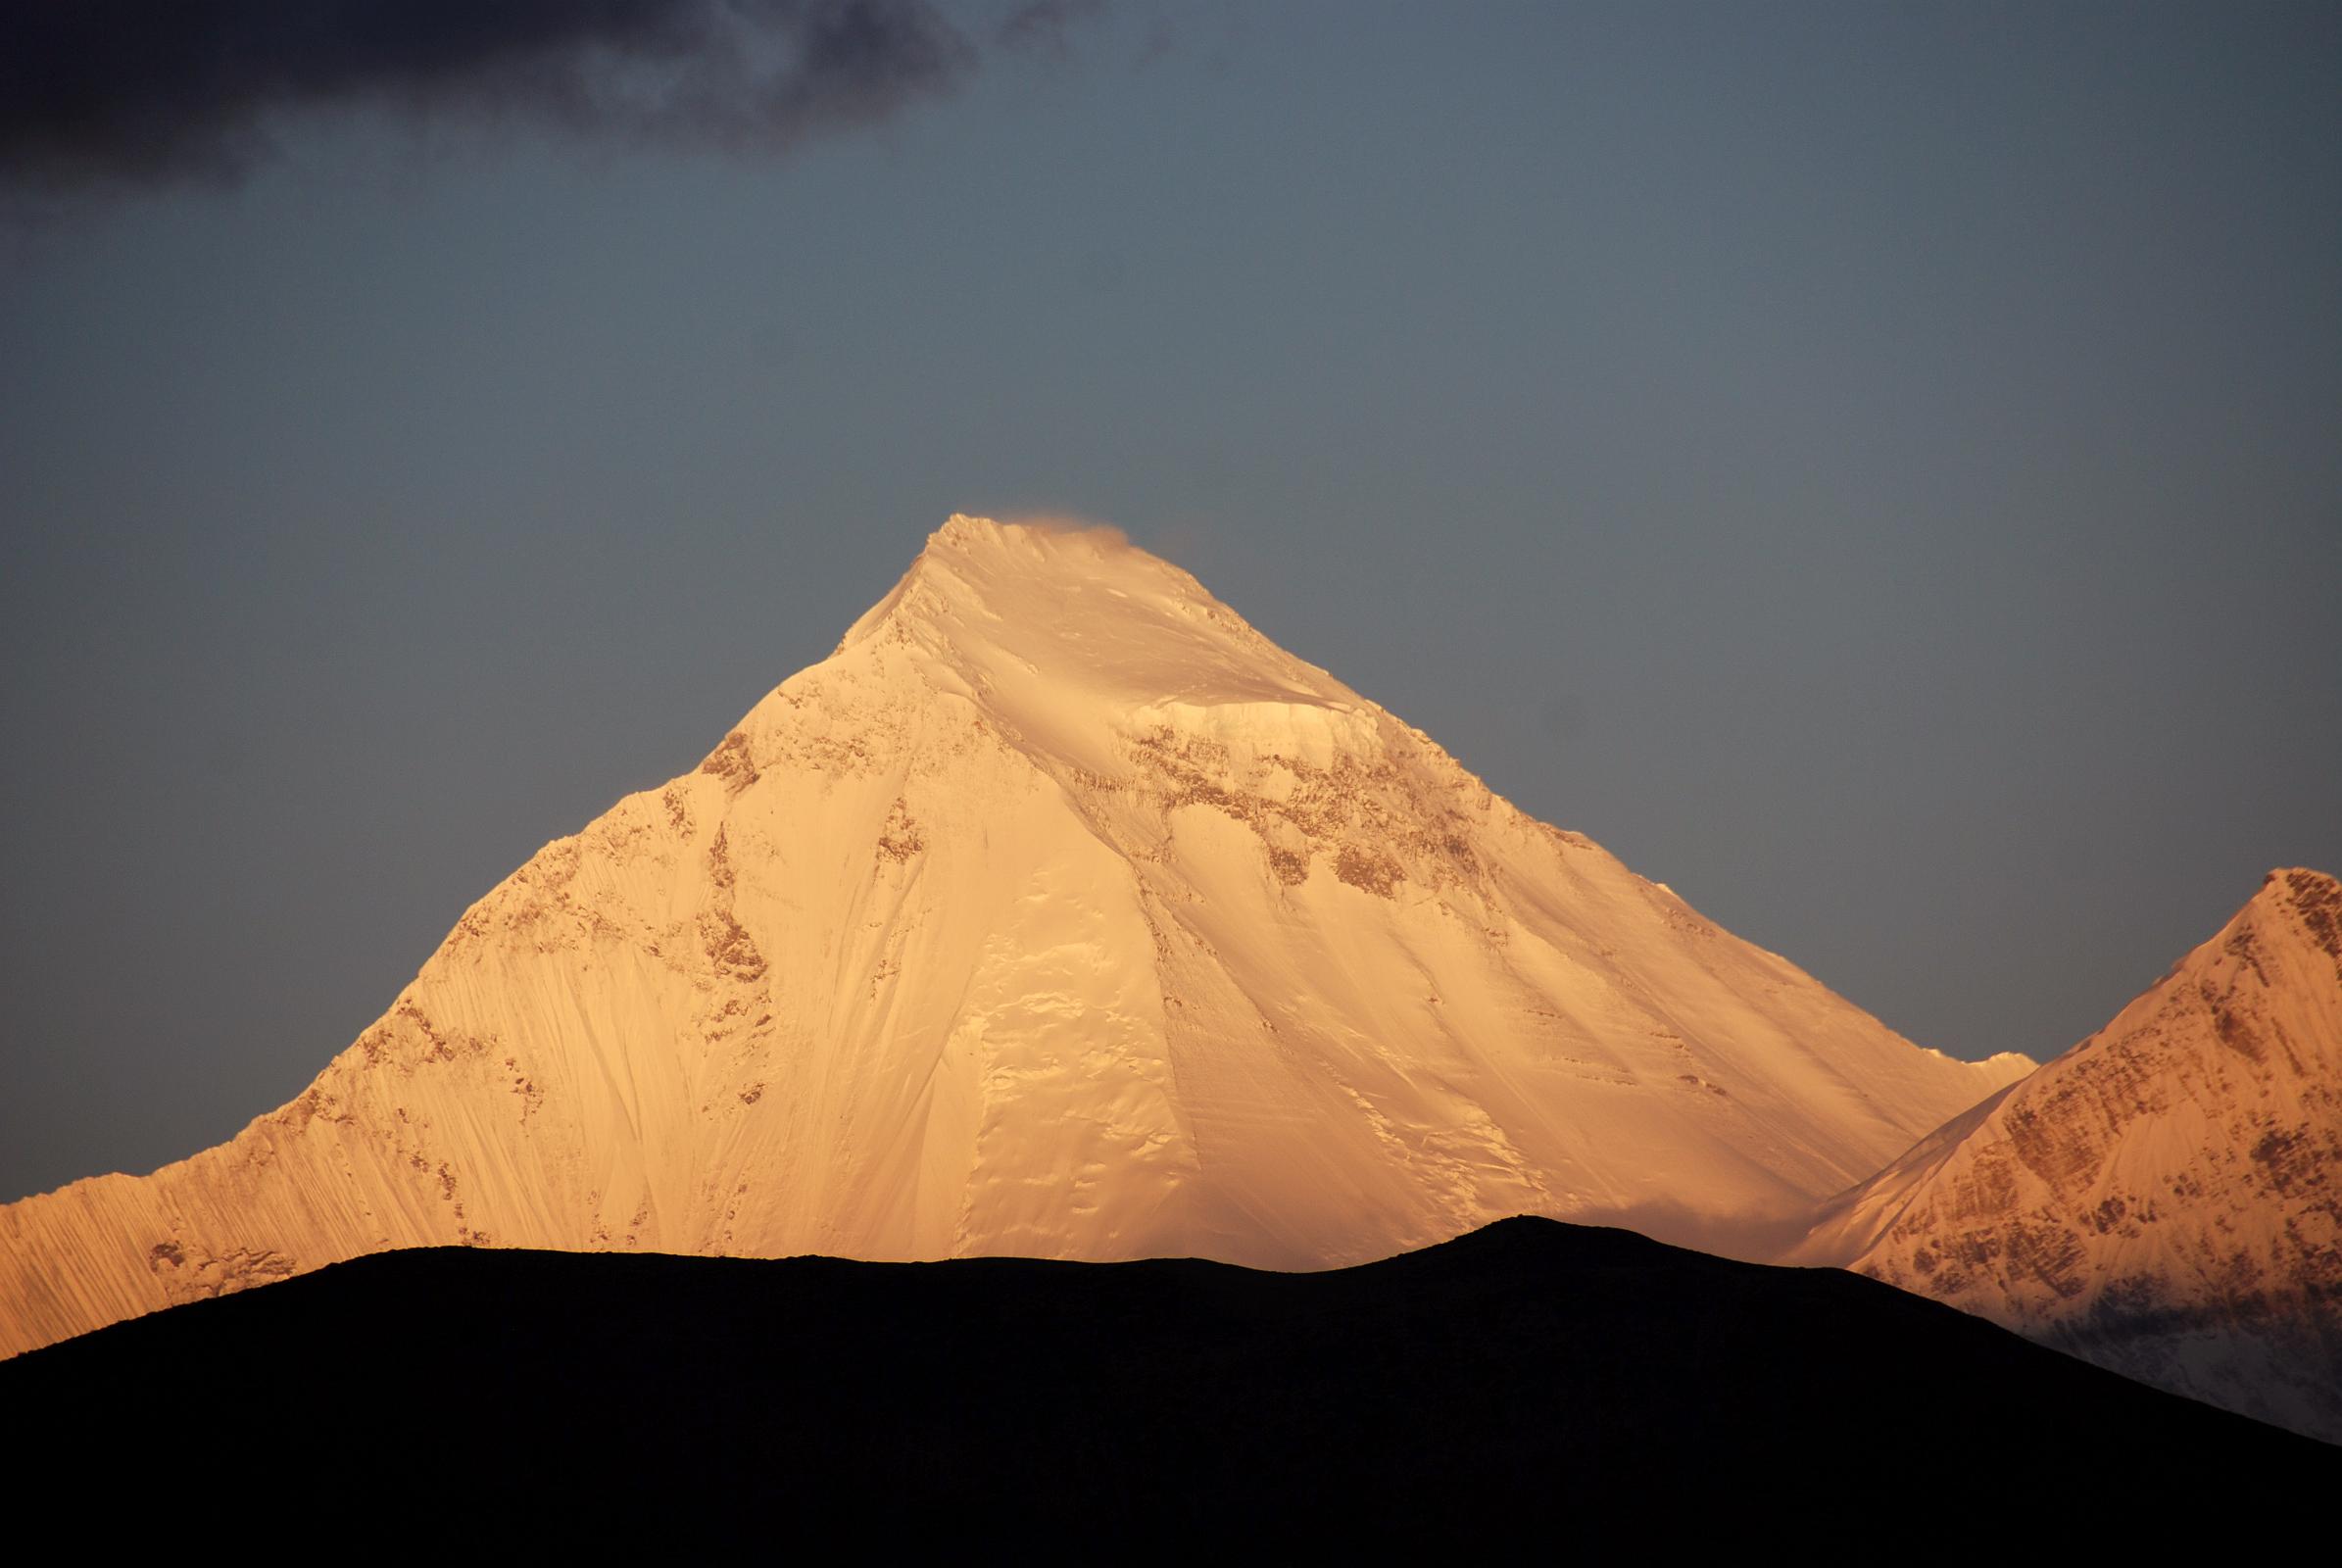 416 Dhaulagiri North Face Close Up At Sunrise From Muktinath I slept in and had to jump out of bed to catch the last few minutes of a beautiful sunrise over the north face of Dhaulagiri, seen from Ranipauwa near Muktinath.